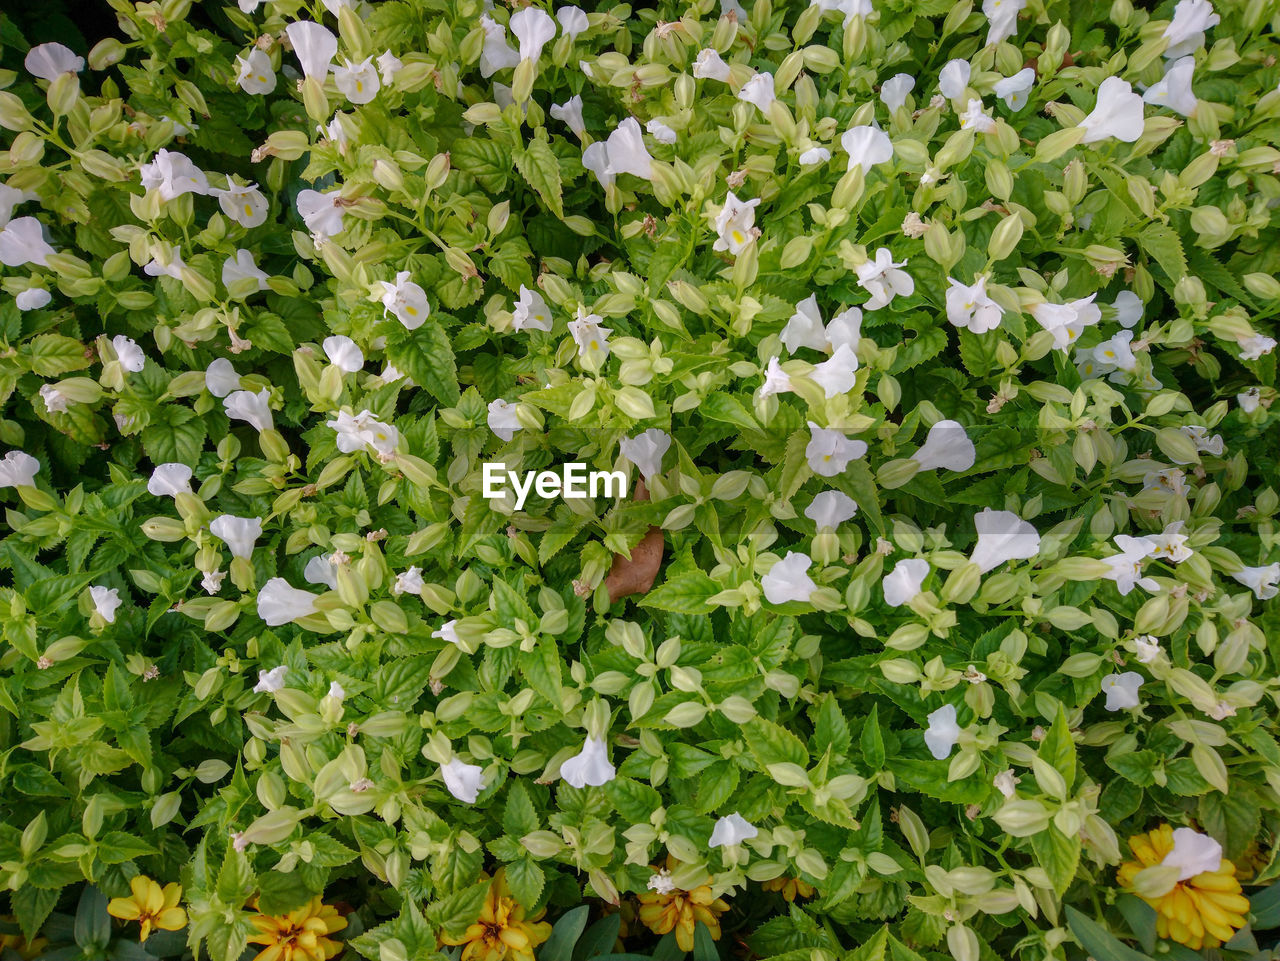 HIGH ANGLE VIEW OF FLOWERING PLANTS ON LAND